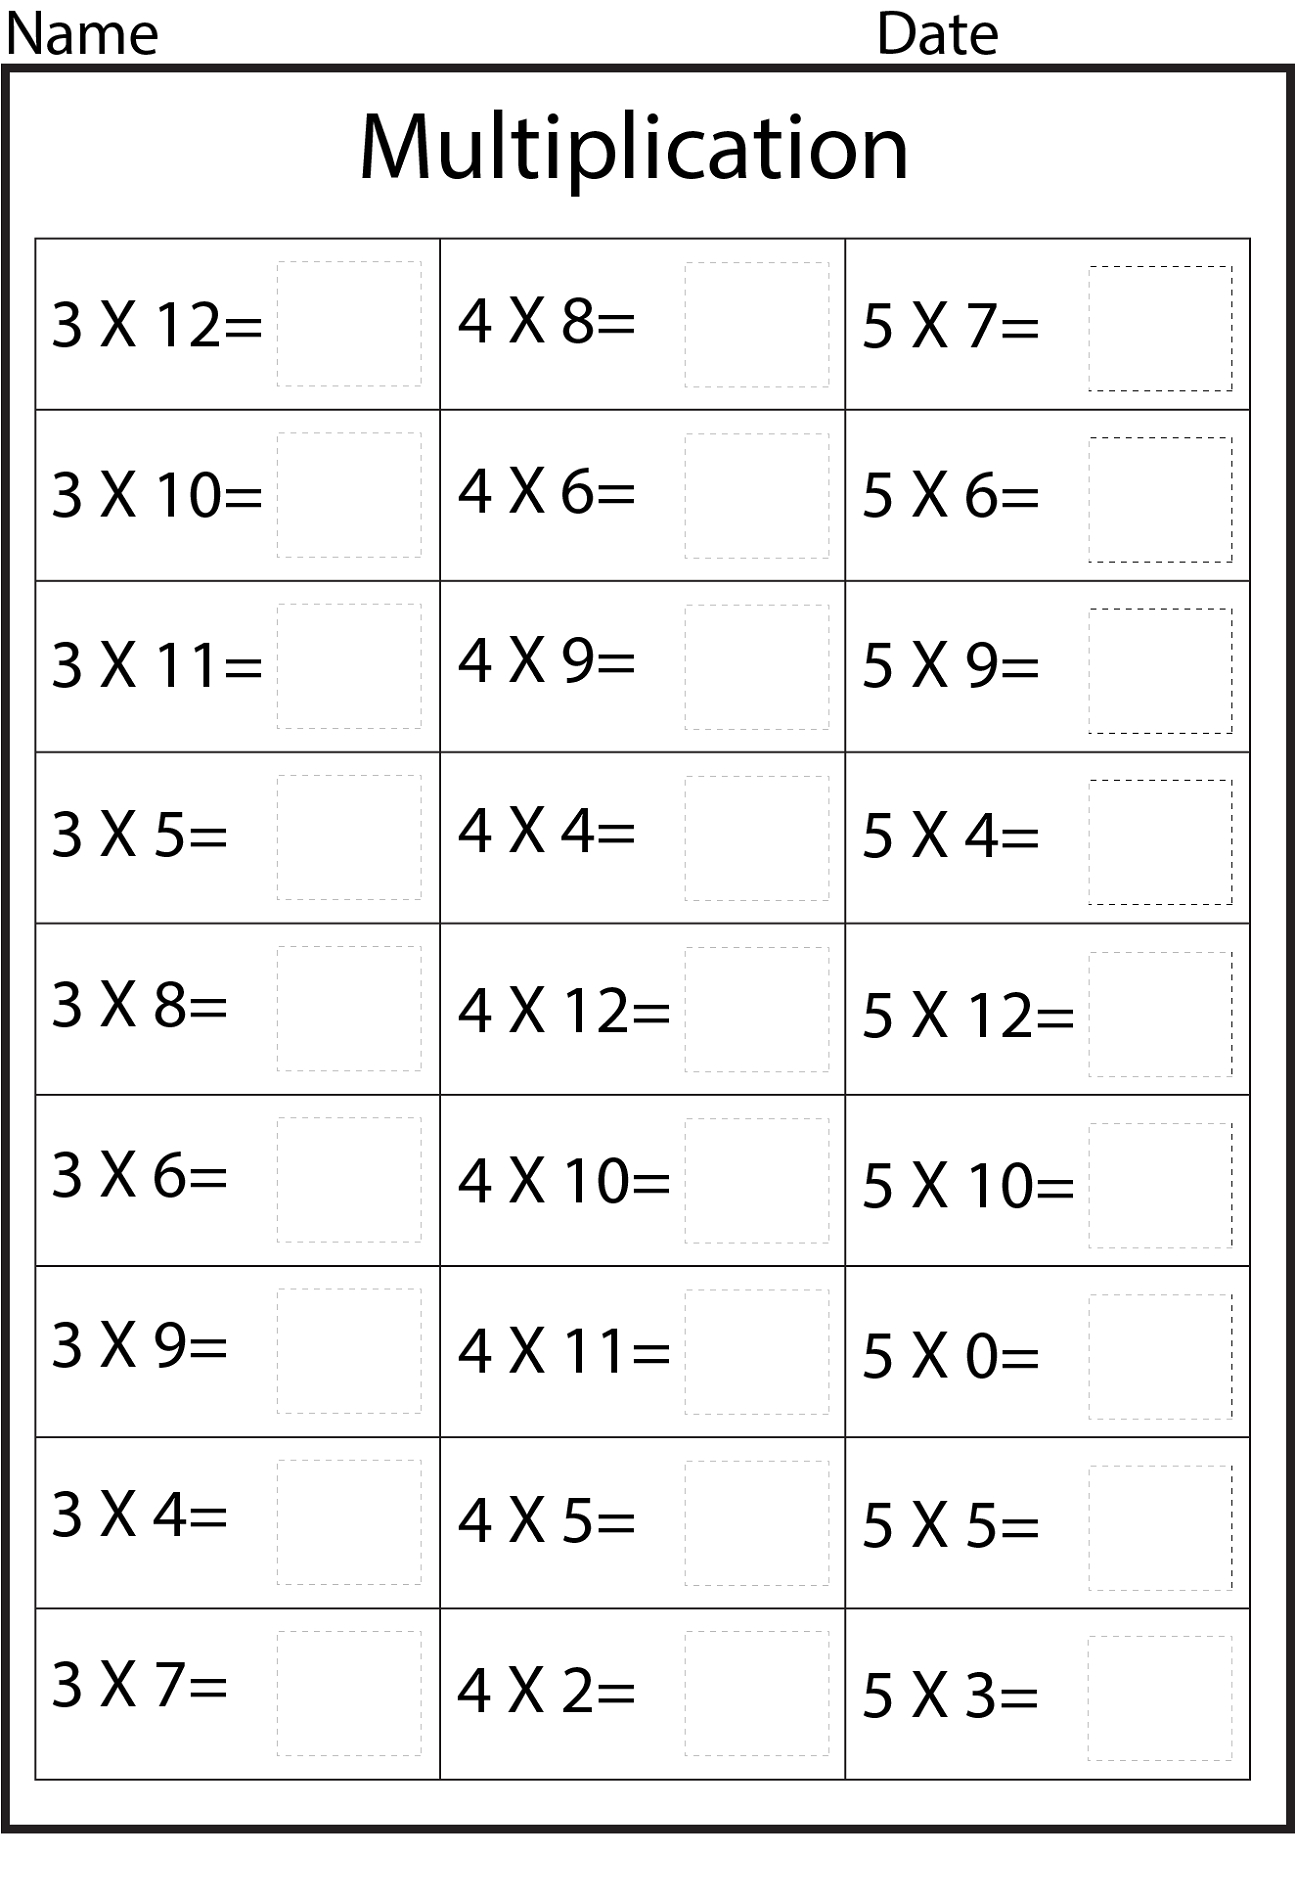 3 Times Table Worksheets | Activity Shelter with Multiplication Worksheets 3 Times Tables